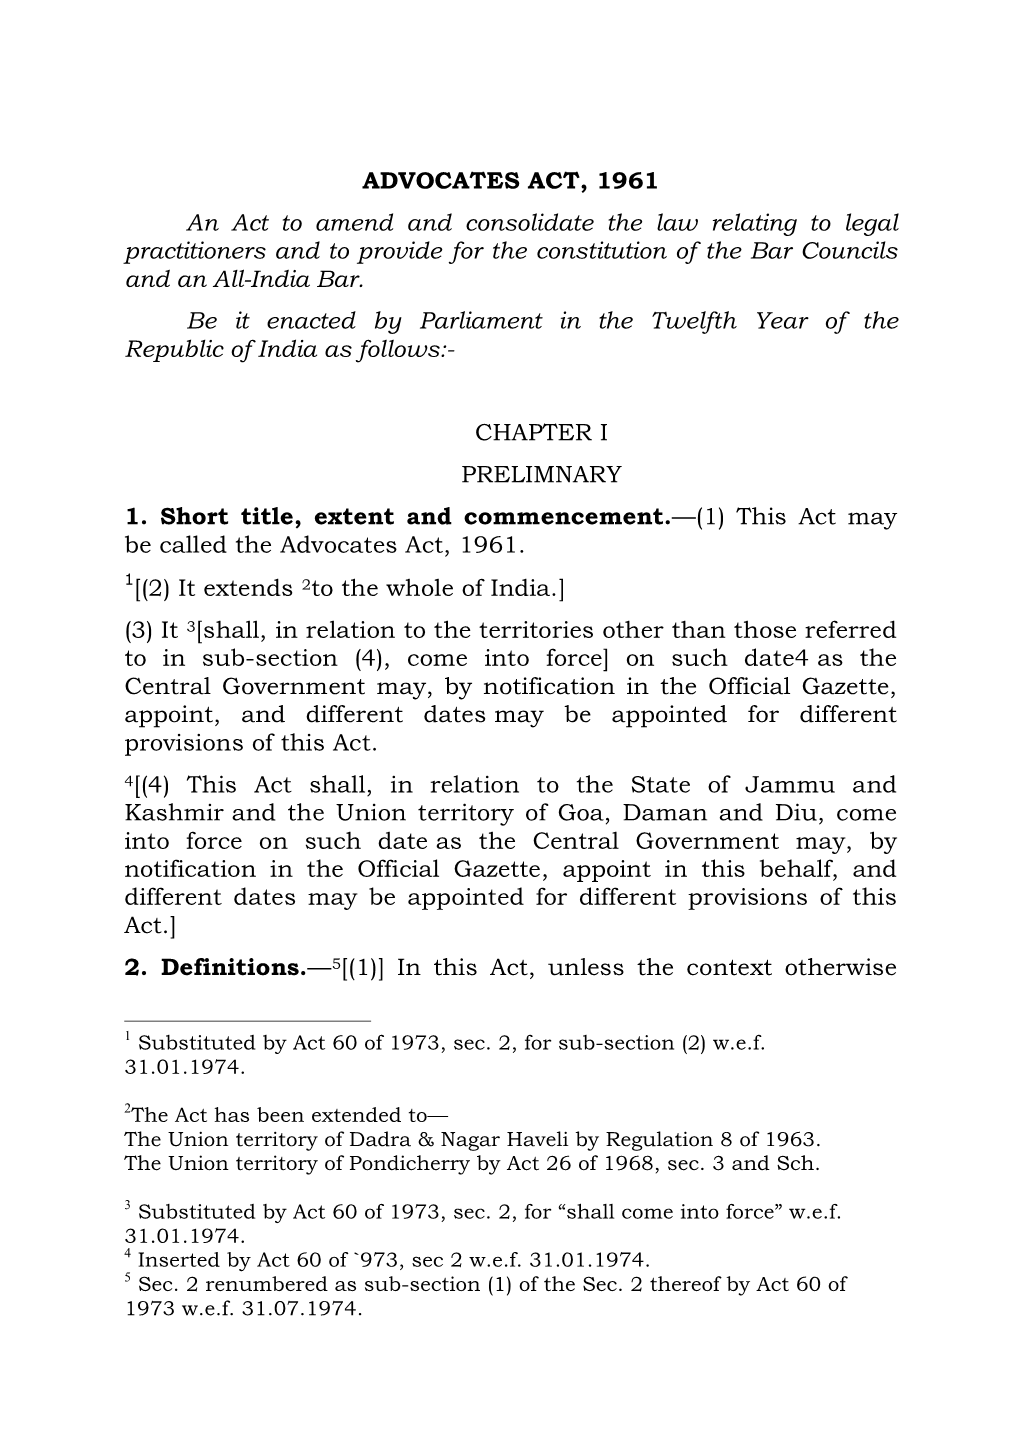 ADVOCATES ACT, 1961 an Act to Amend